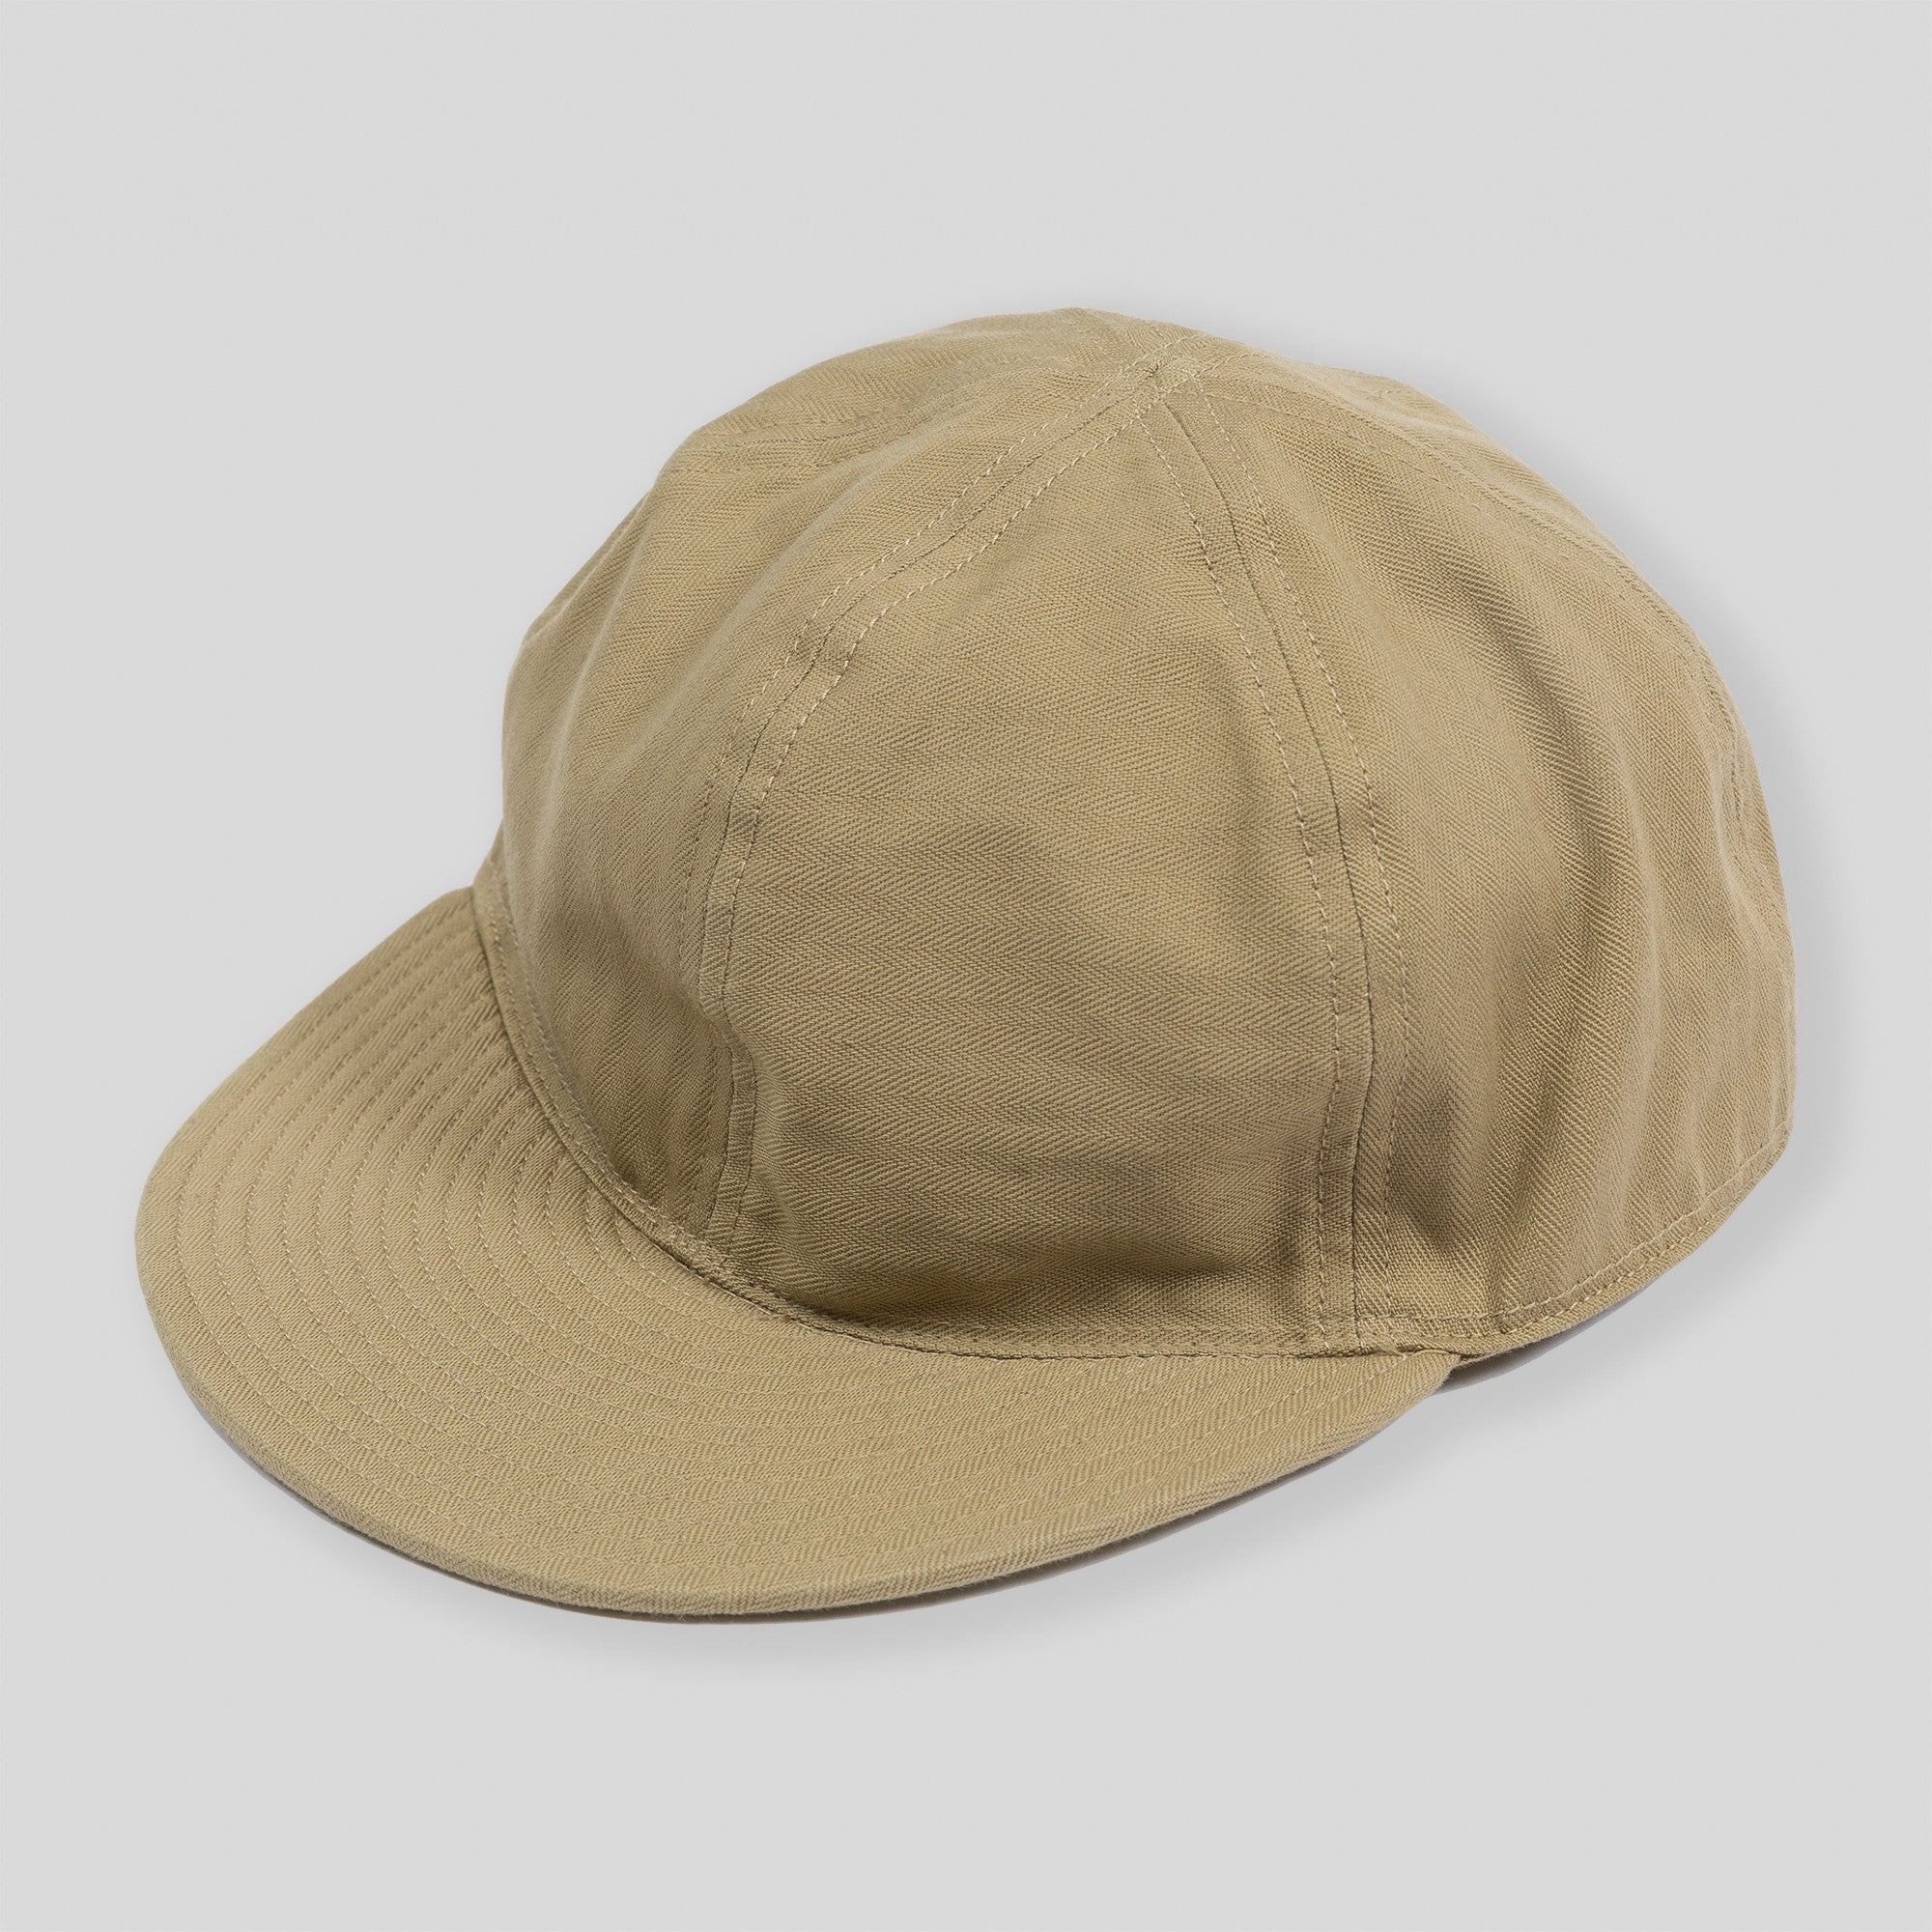 TYPE A-3 CAP – The Real McCoy's